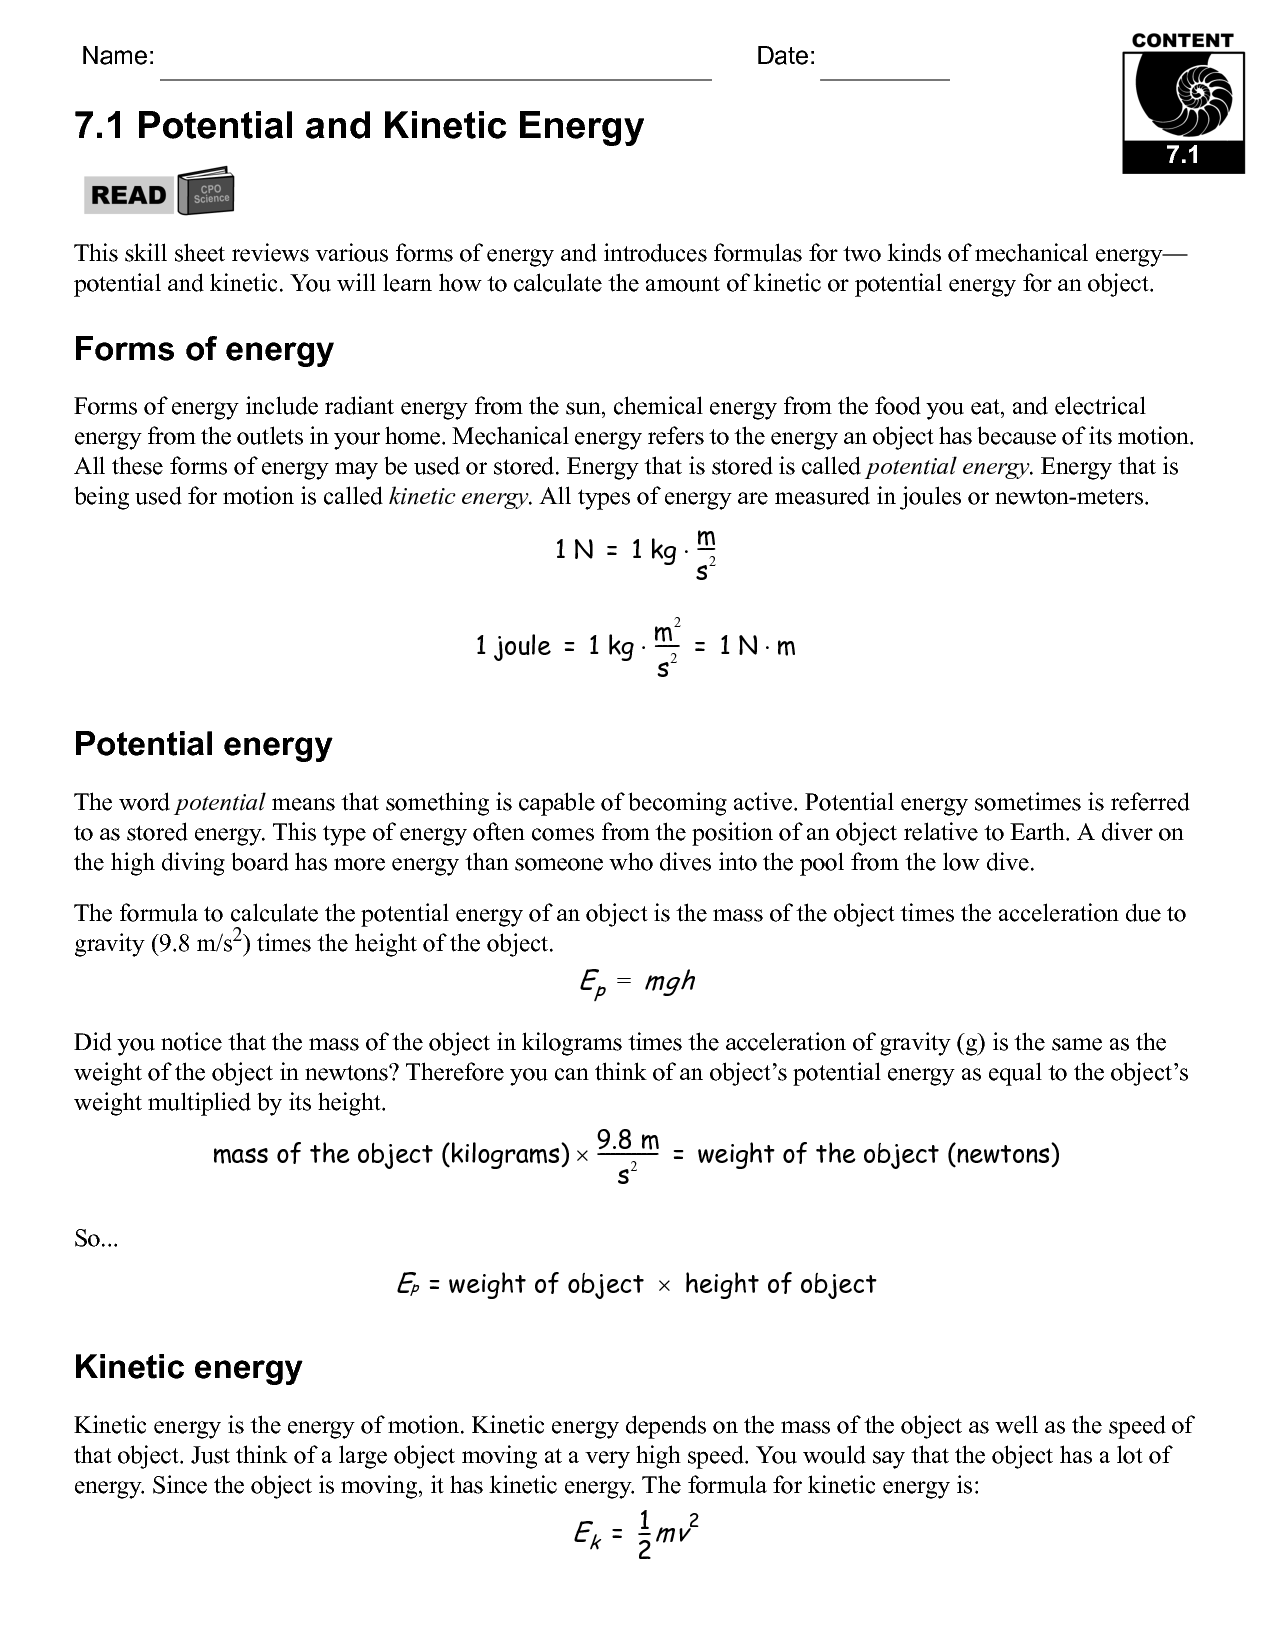 17 Best Images of Potential Energy Practice Problems Worksheet  Potential and Kinetic Energy 